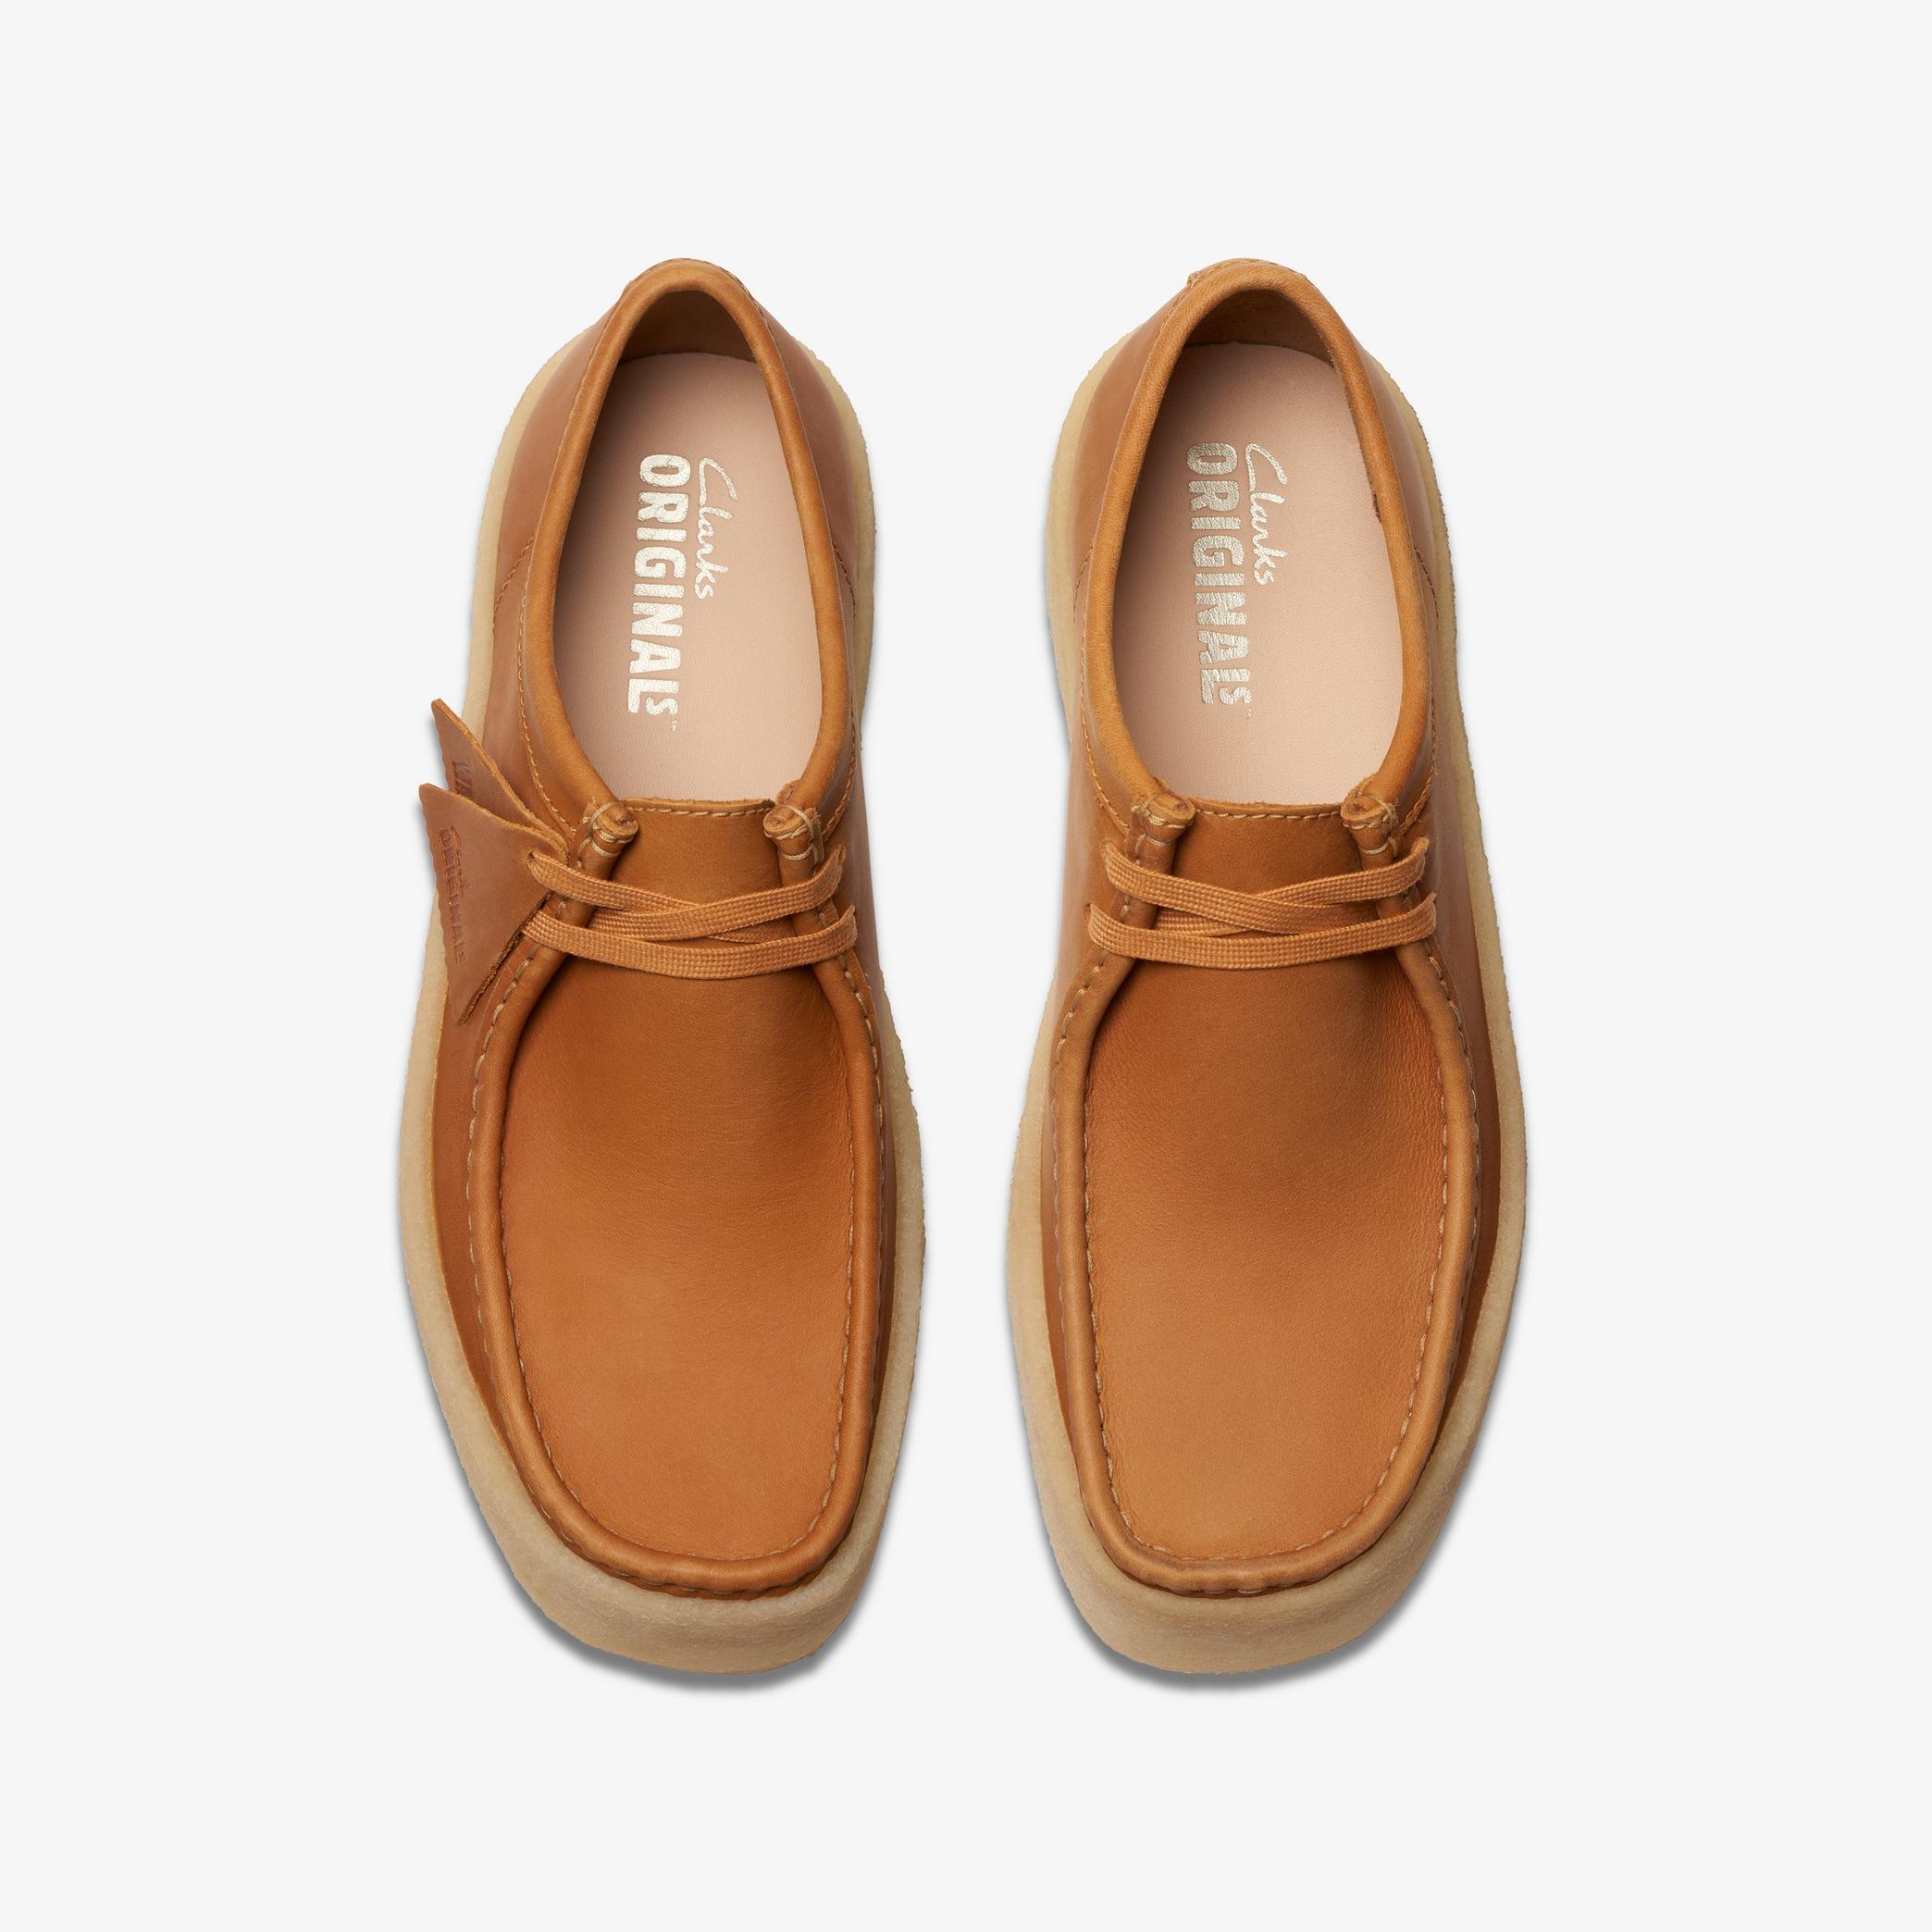 Wallabee Cup Mid Tan Leather Wallabee, view 6 of 6